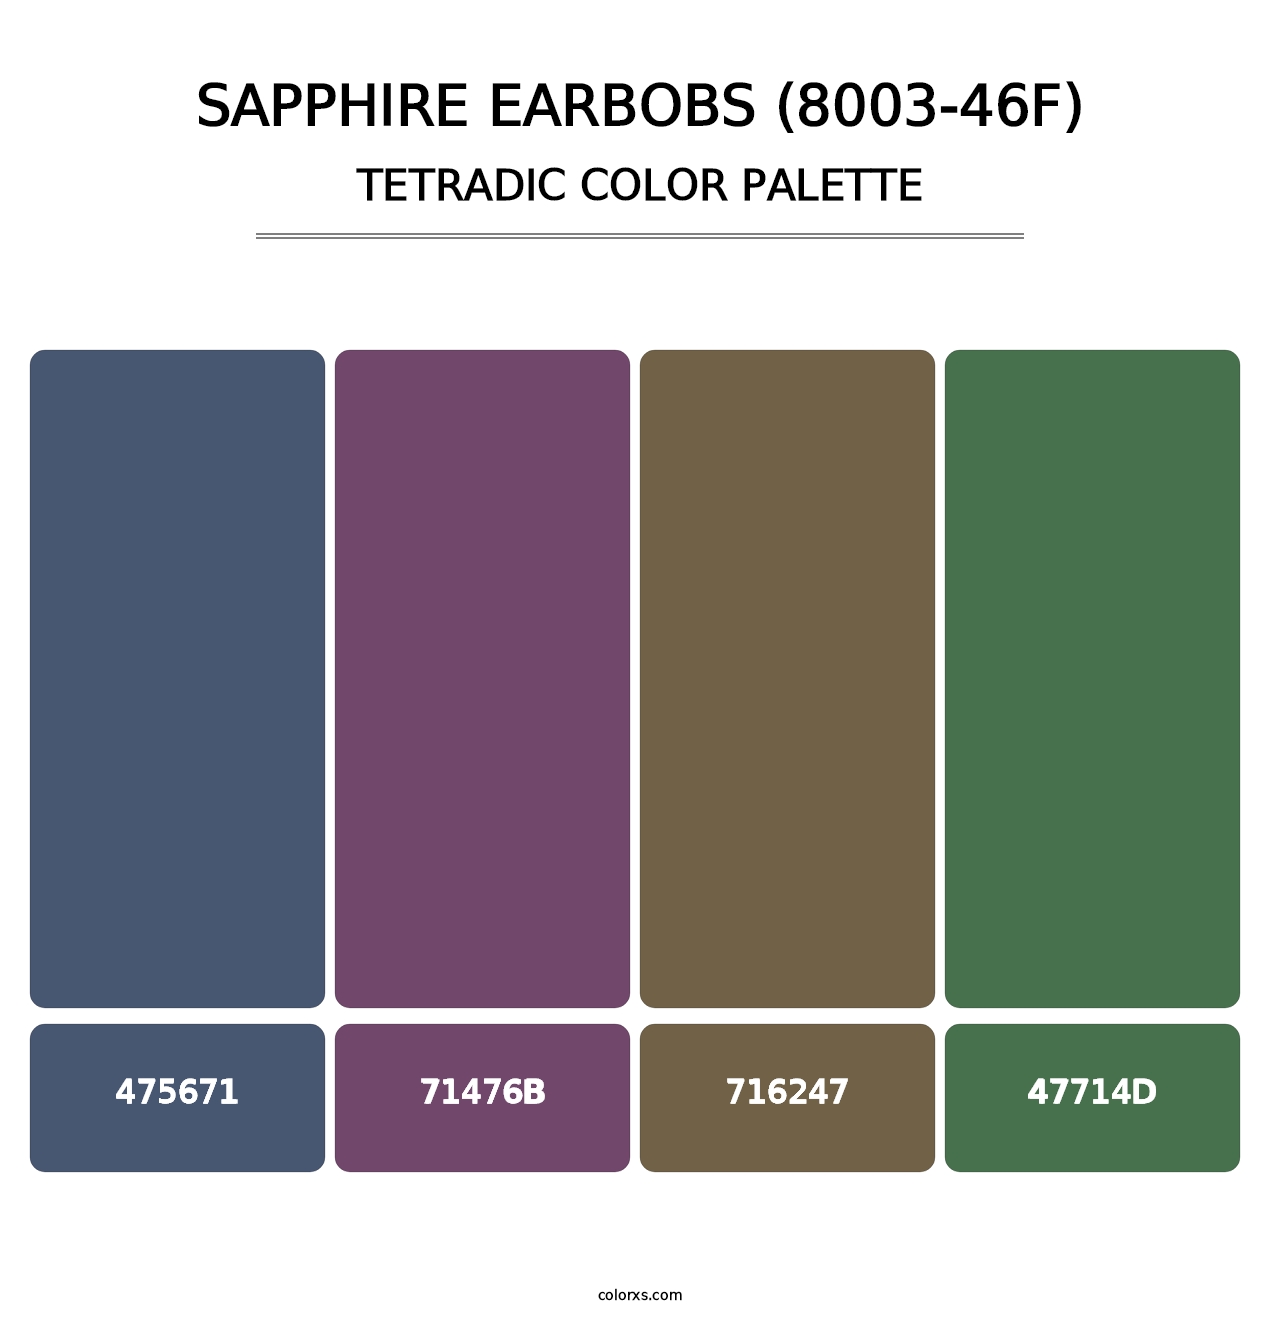 Sapphire Earbobs (8003-46F) - Tetradic Color Palette